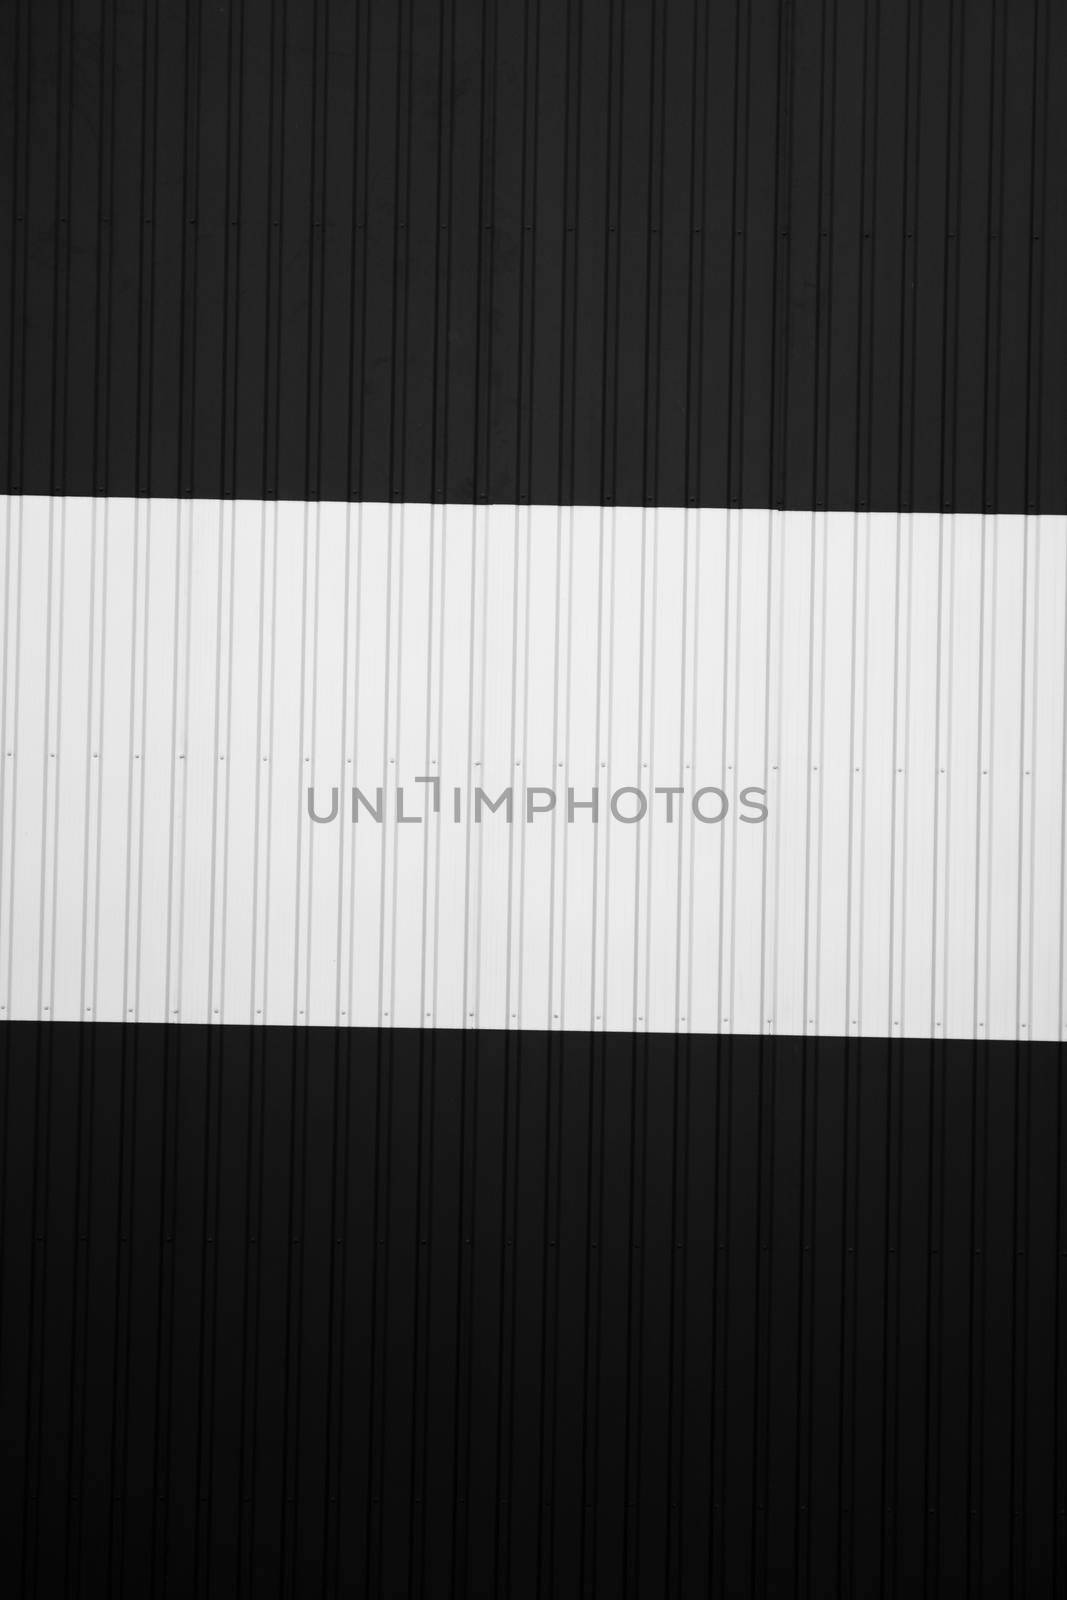 Black and white corrugated iron sheet used as a facade of a warehouse or factory. Texture of a seamless corrugated zinc sheet metal aluminum facade. Architecture. Metal texture